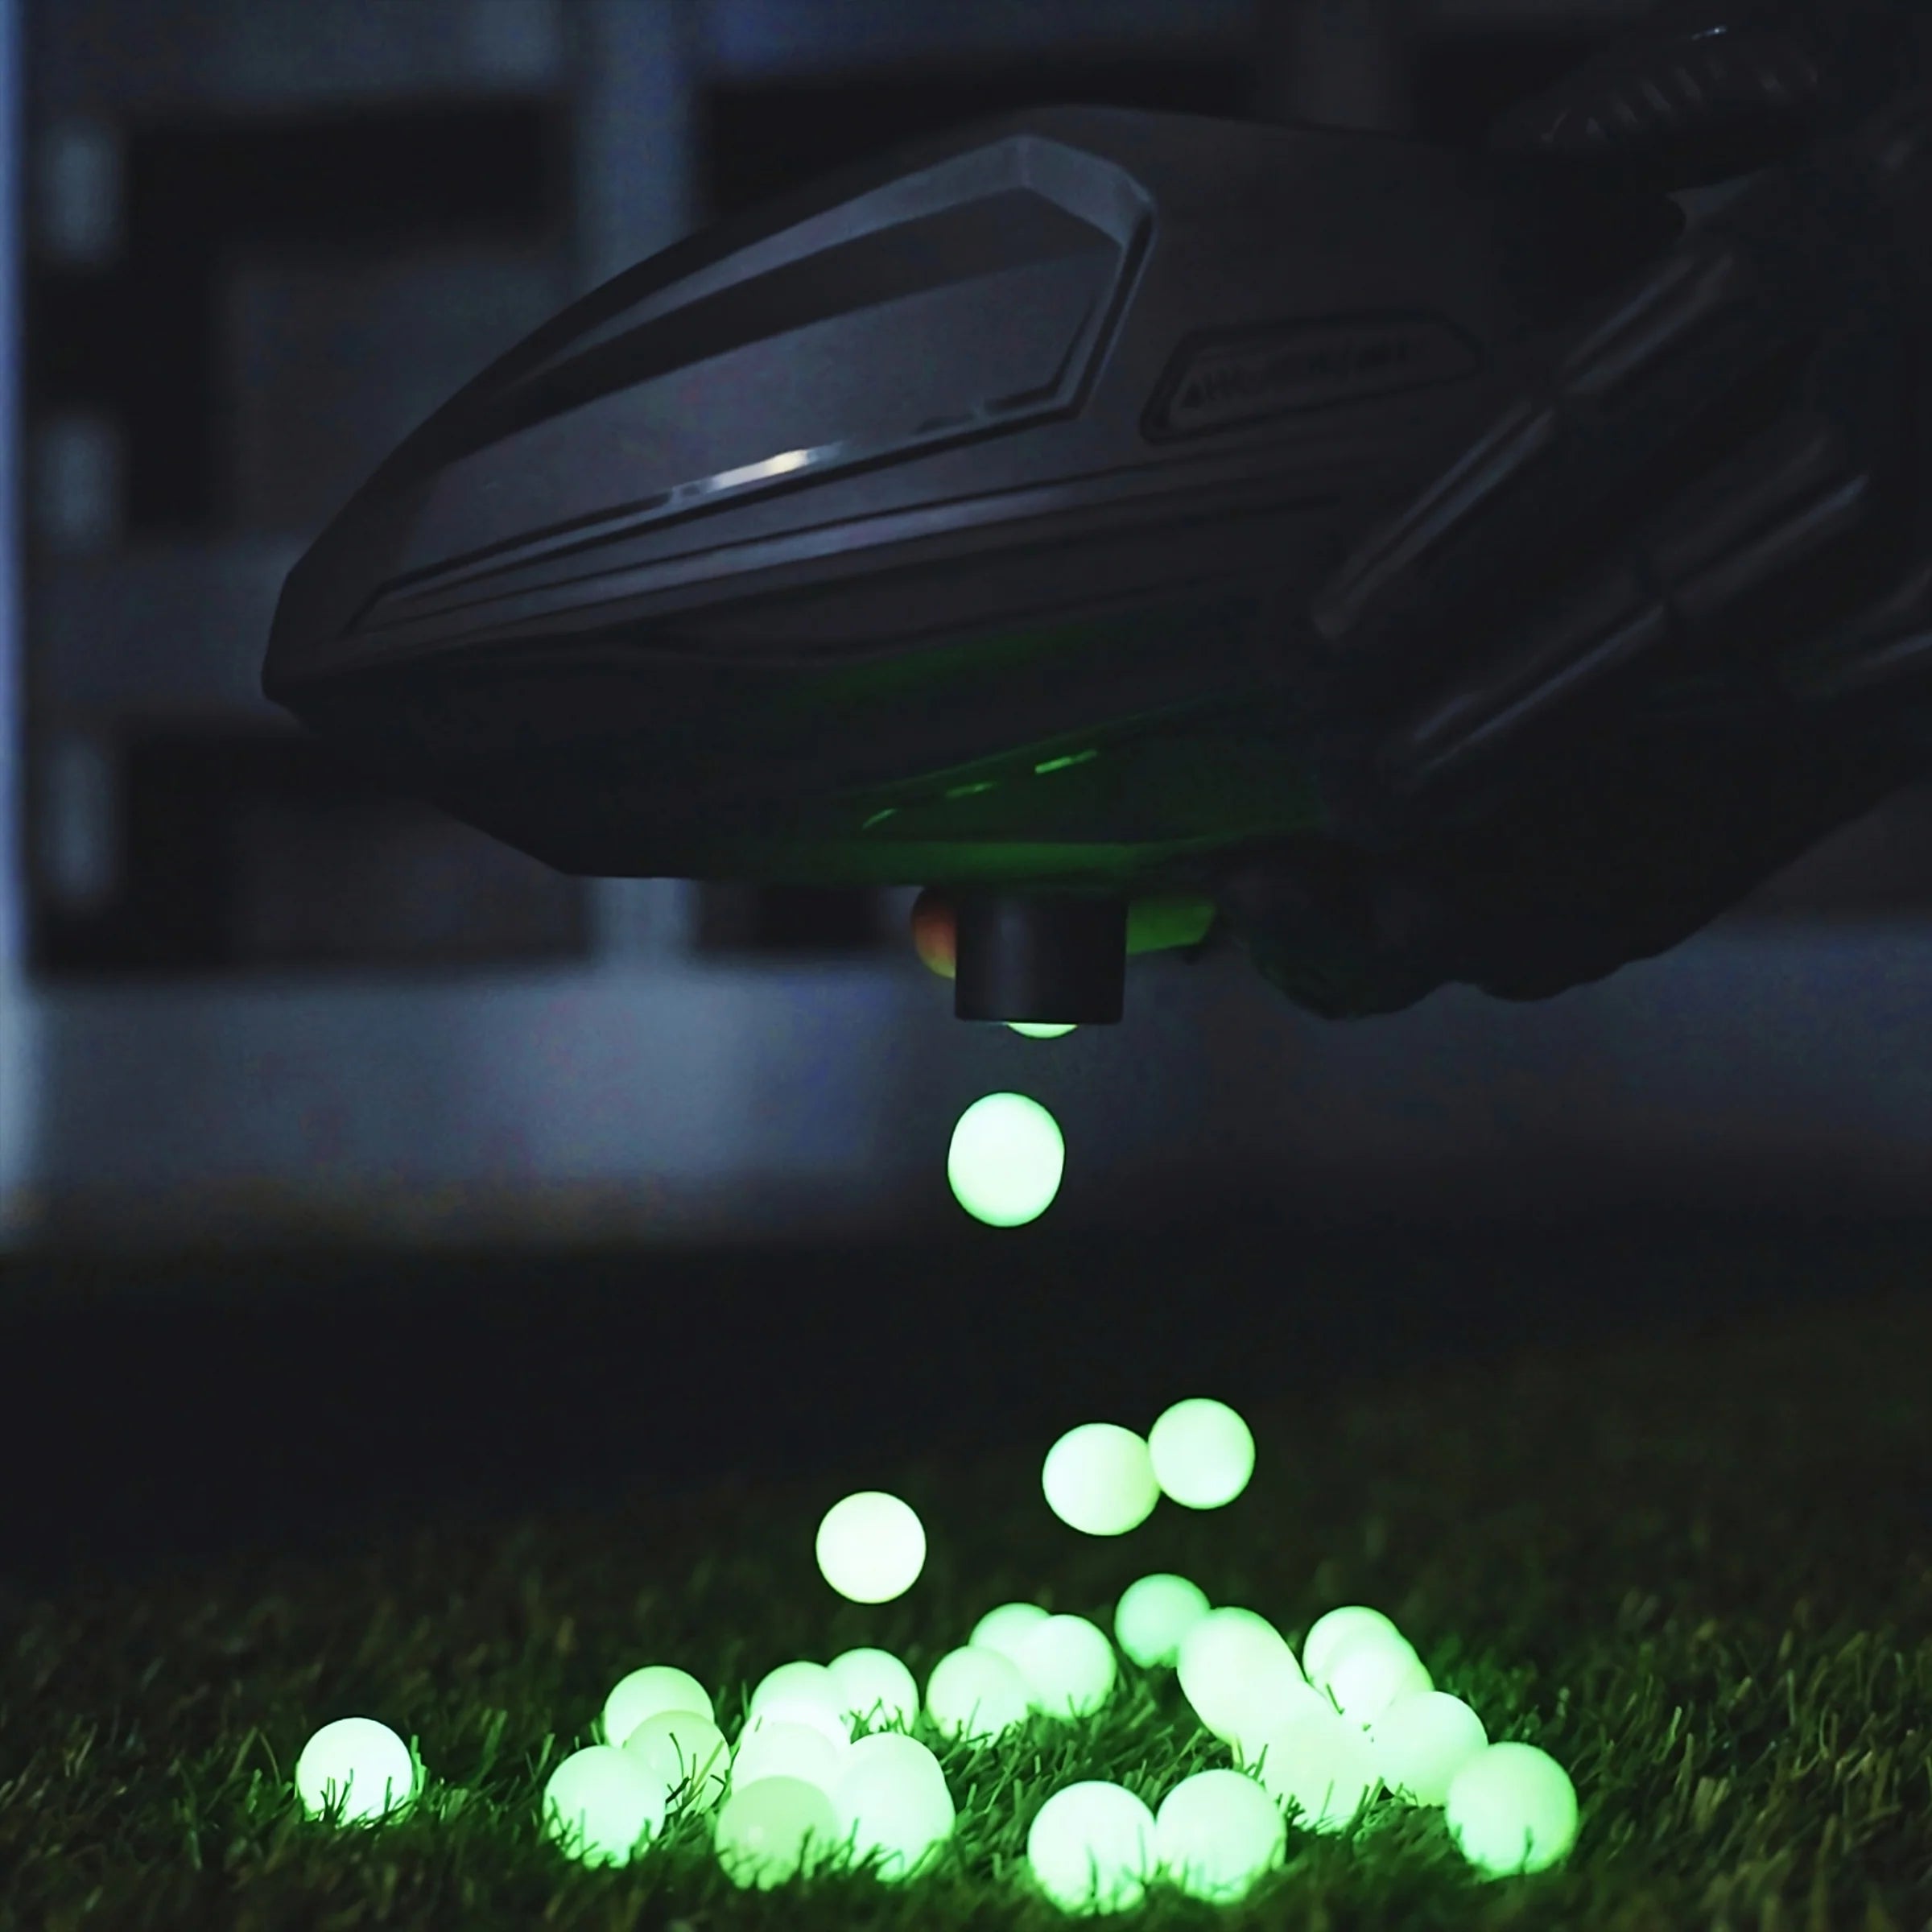 HK Army Glow-In-The-Dark Paintballs Level 4 (2000 Rounds) - ssairsoft.com